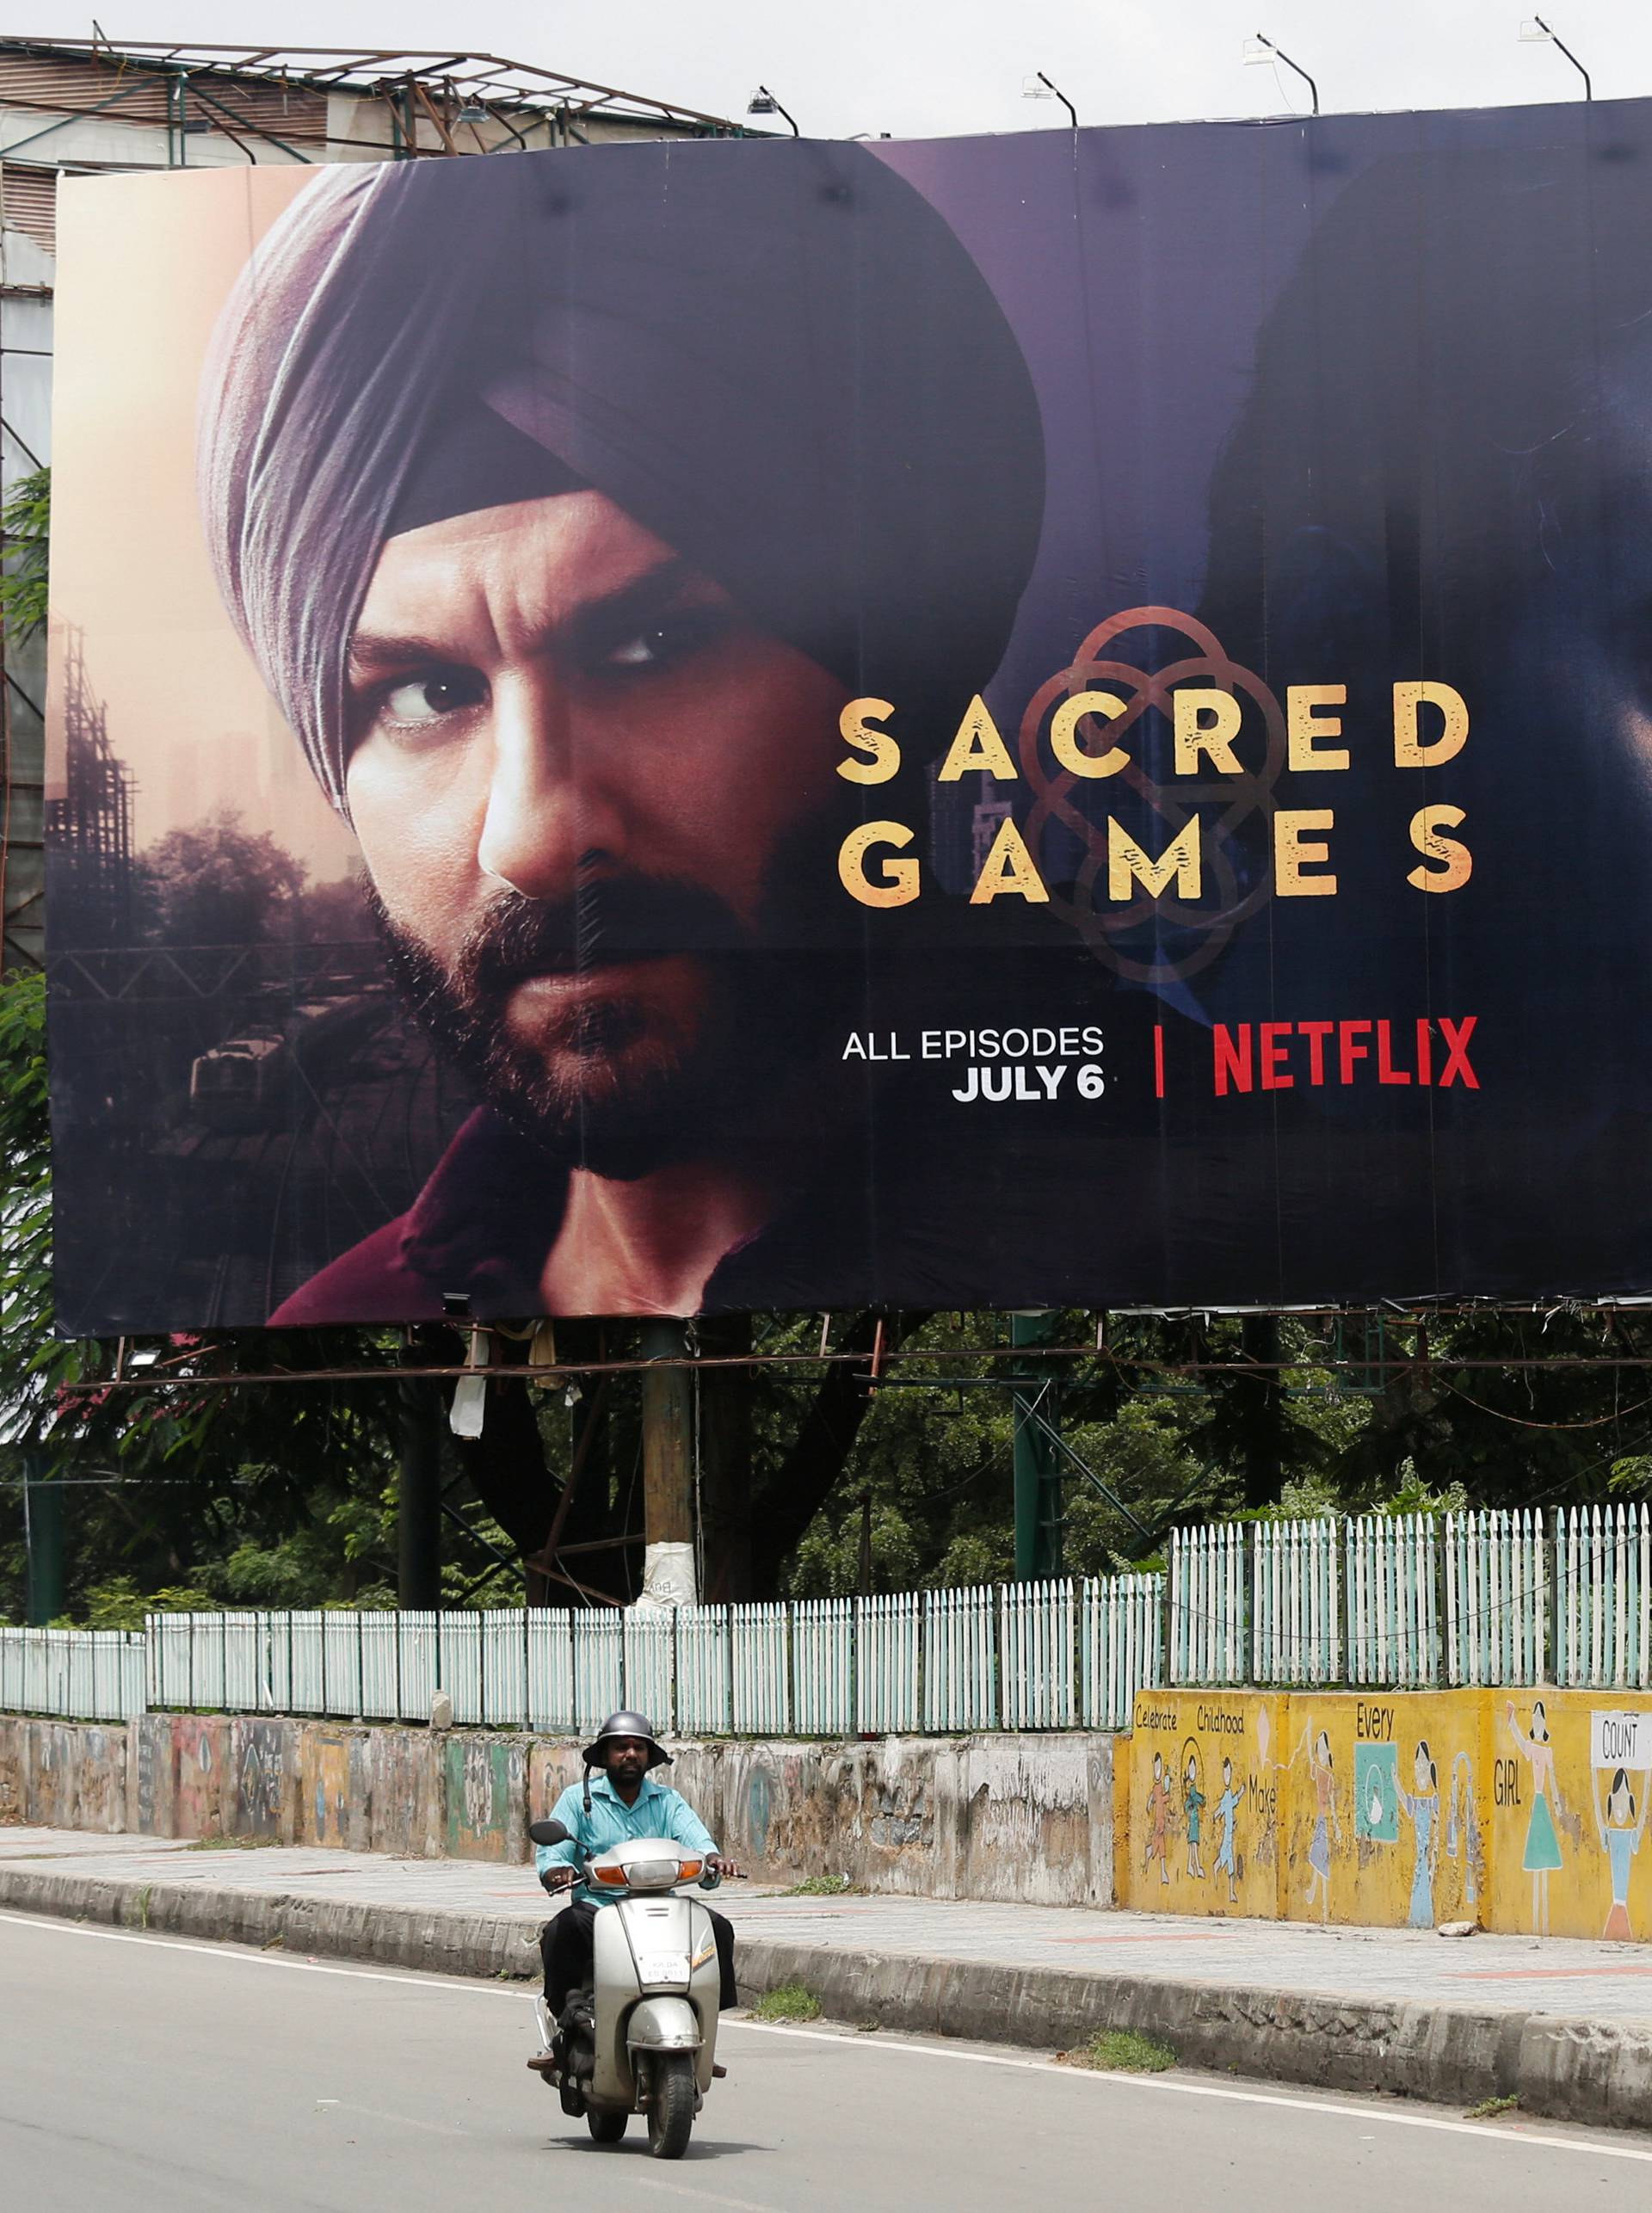 A man rides his scooter past a hoardings of Netflix's new television series "Sacred Games" in Bengaluru,